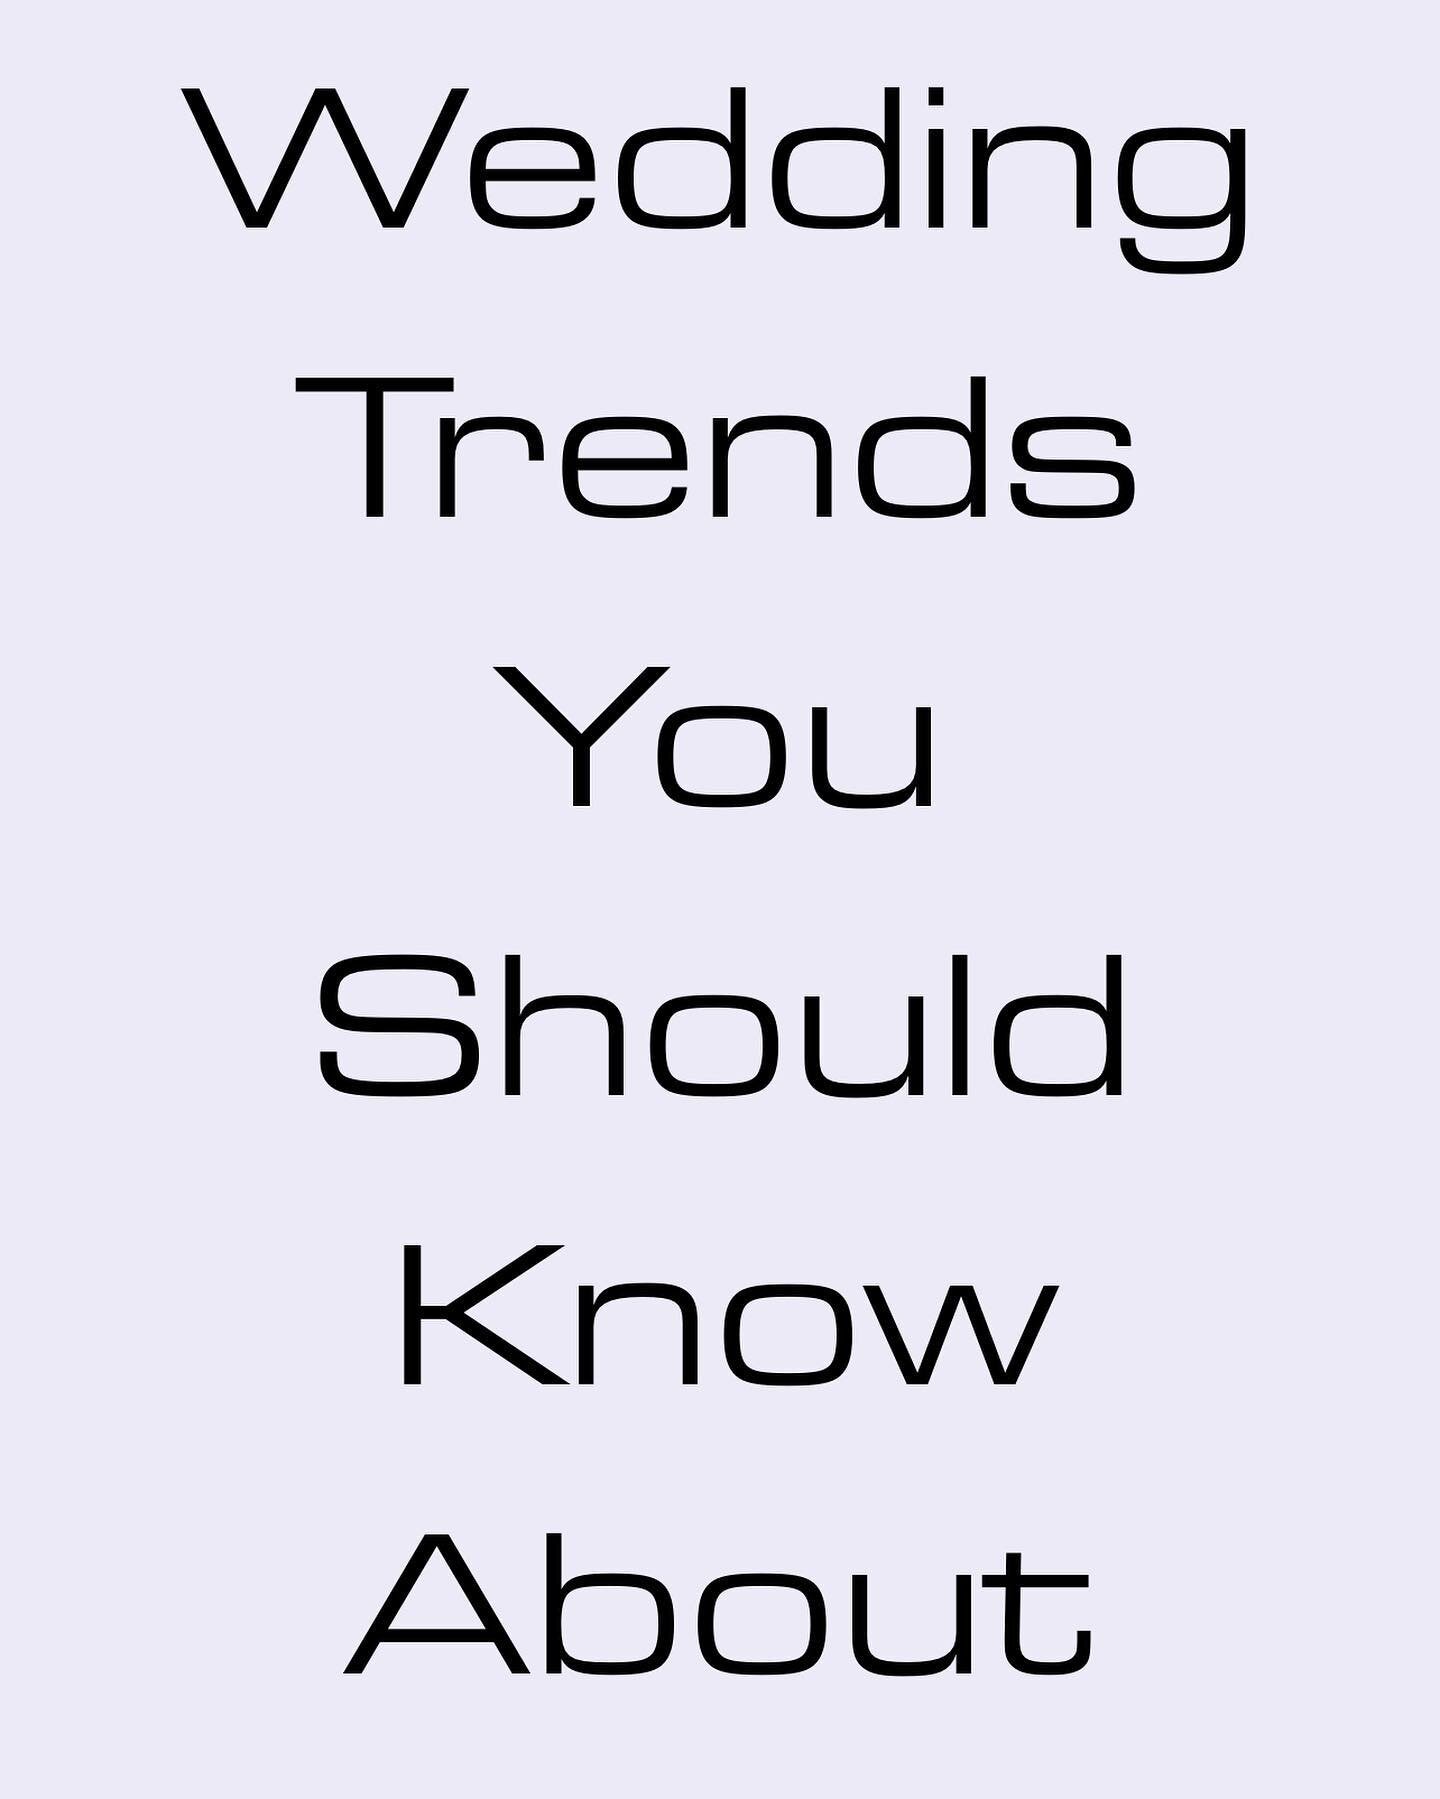 🚨🚨🚨Time for another blog!!! 🚨🚨🚨
Attention all brides-to-be! Say hello to the future of weddings with my latest blog post on 2023 wedding trends. From audio guest books on old fashioned looking phones to futuristic tech, discover the must-haves 